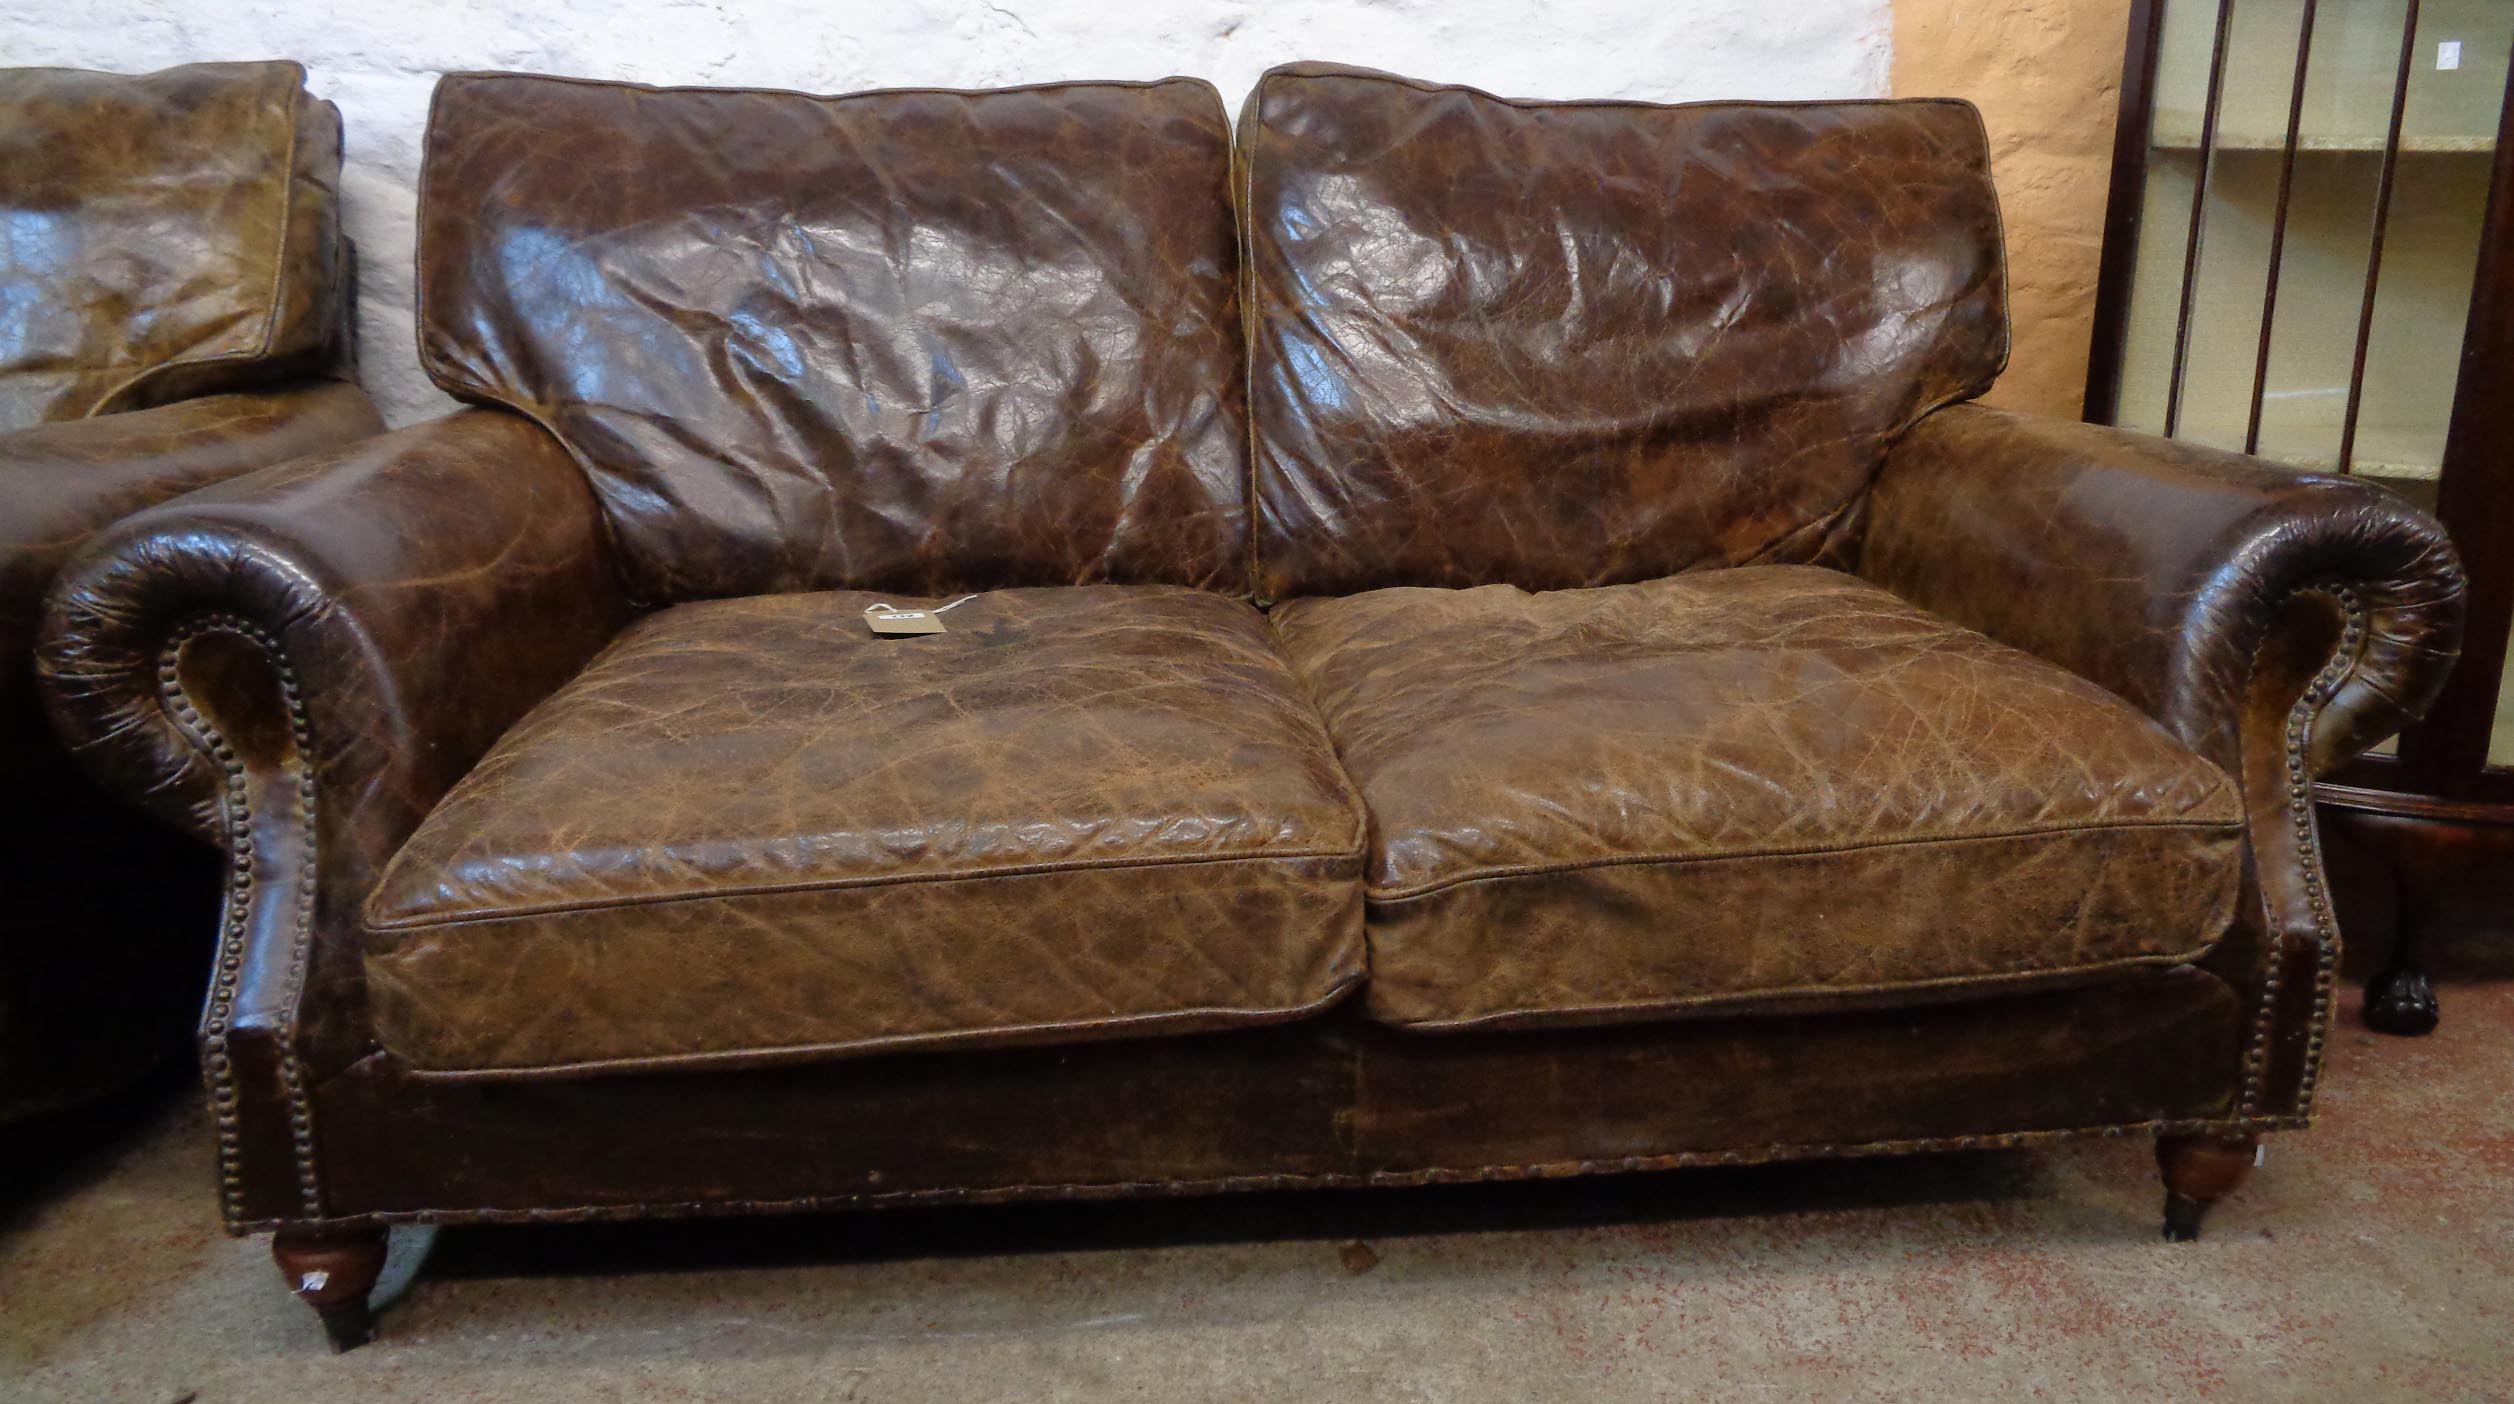 A 5' 8" studded brown leather upholstered two seater settee and armchair to match - the settee